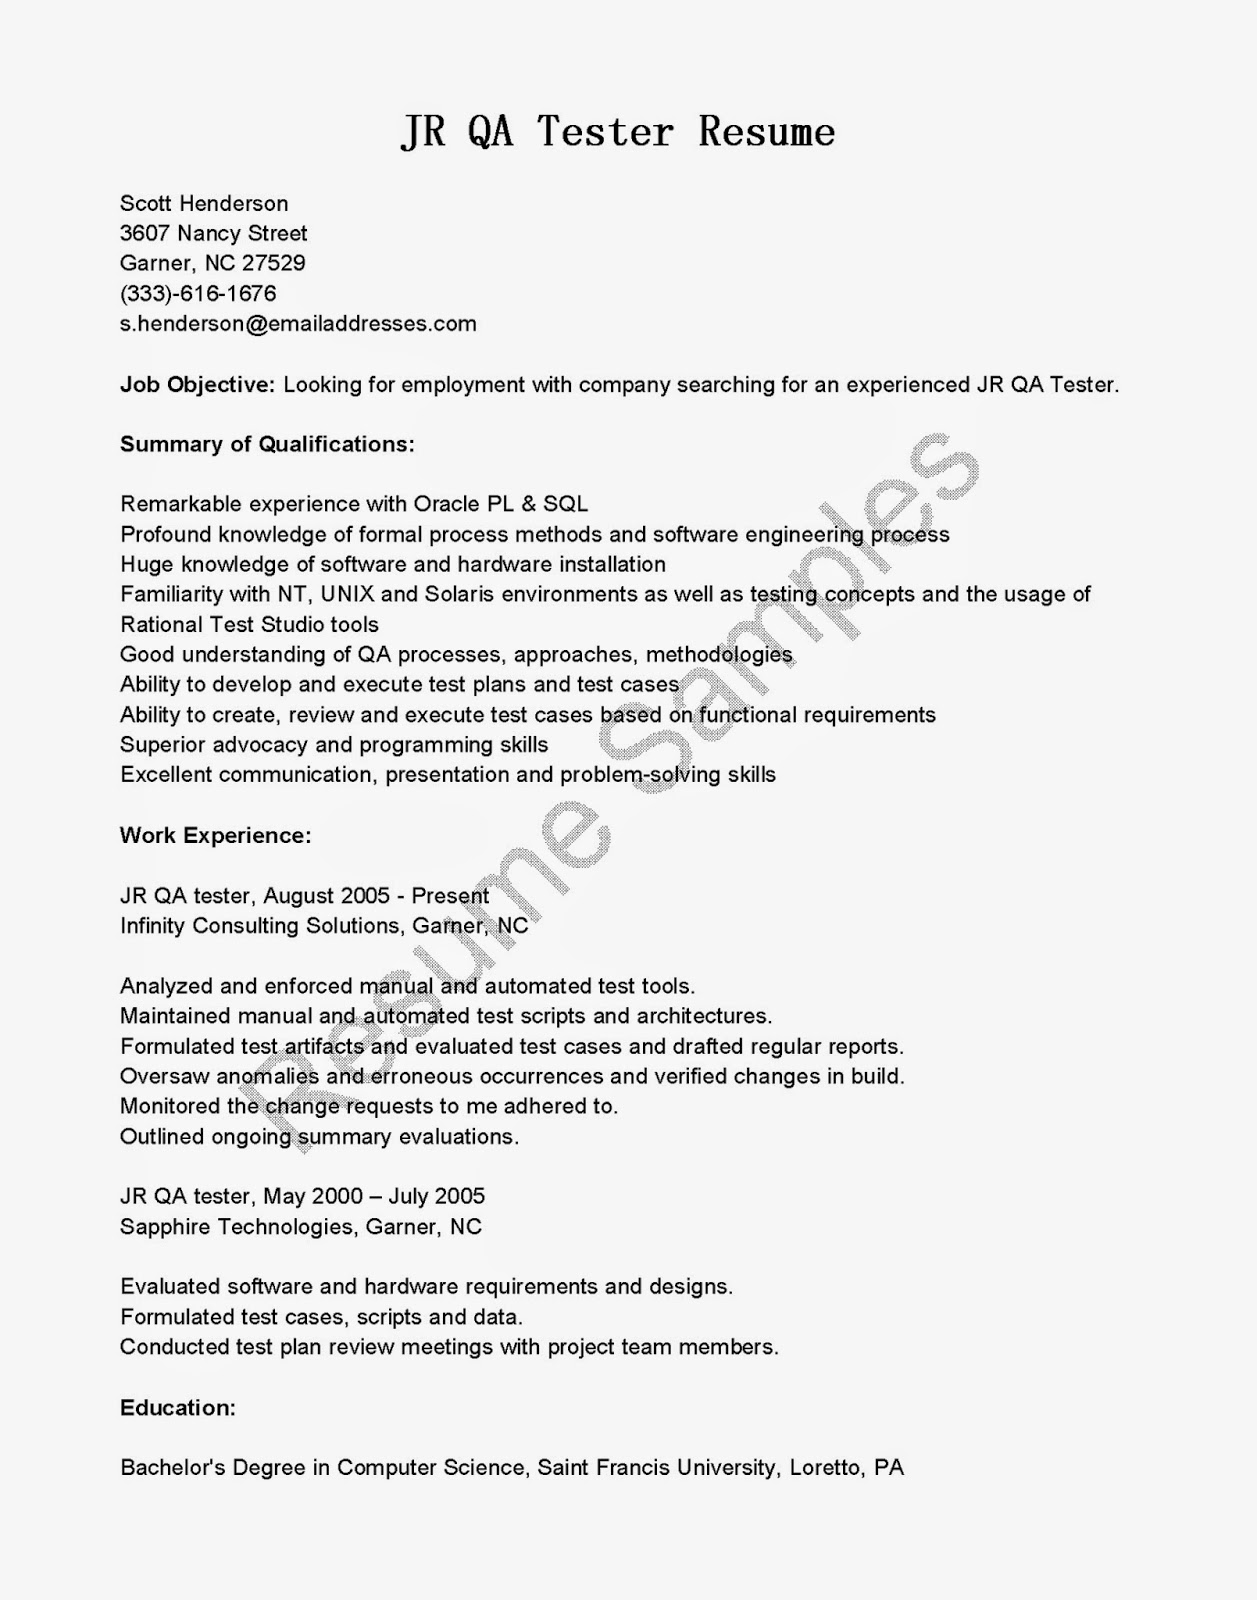 Sample resume frequent job changes